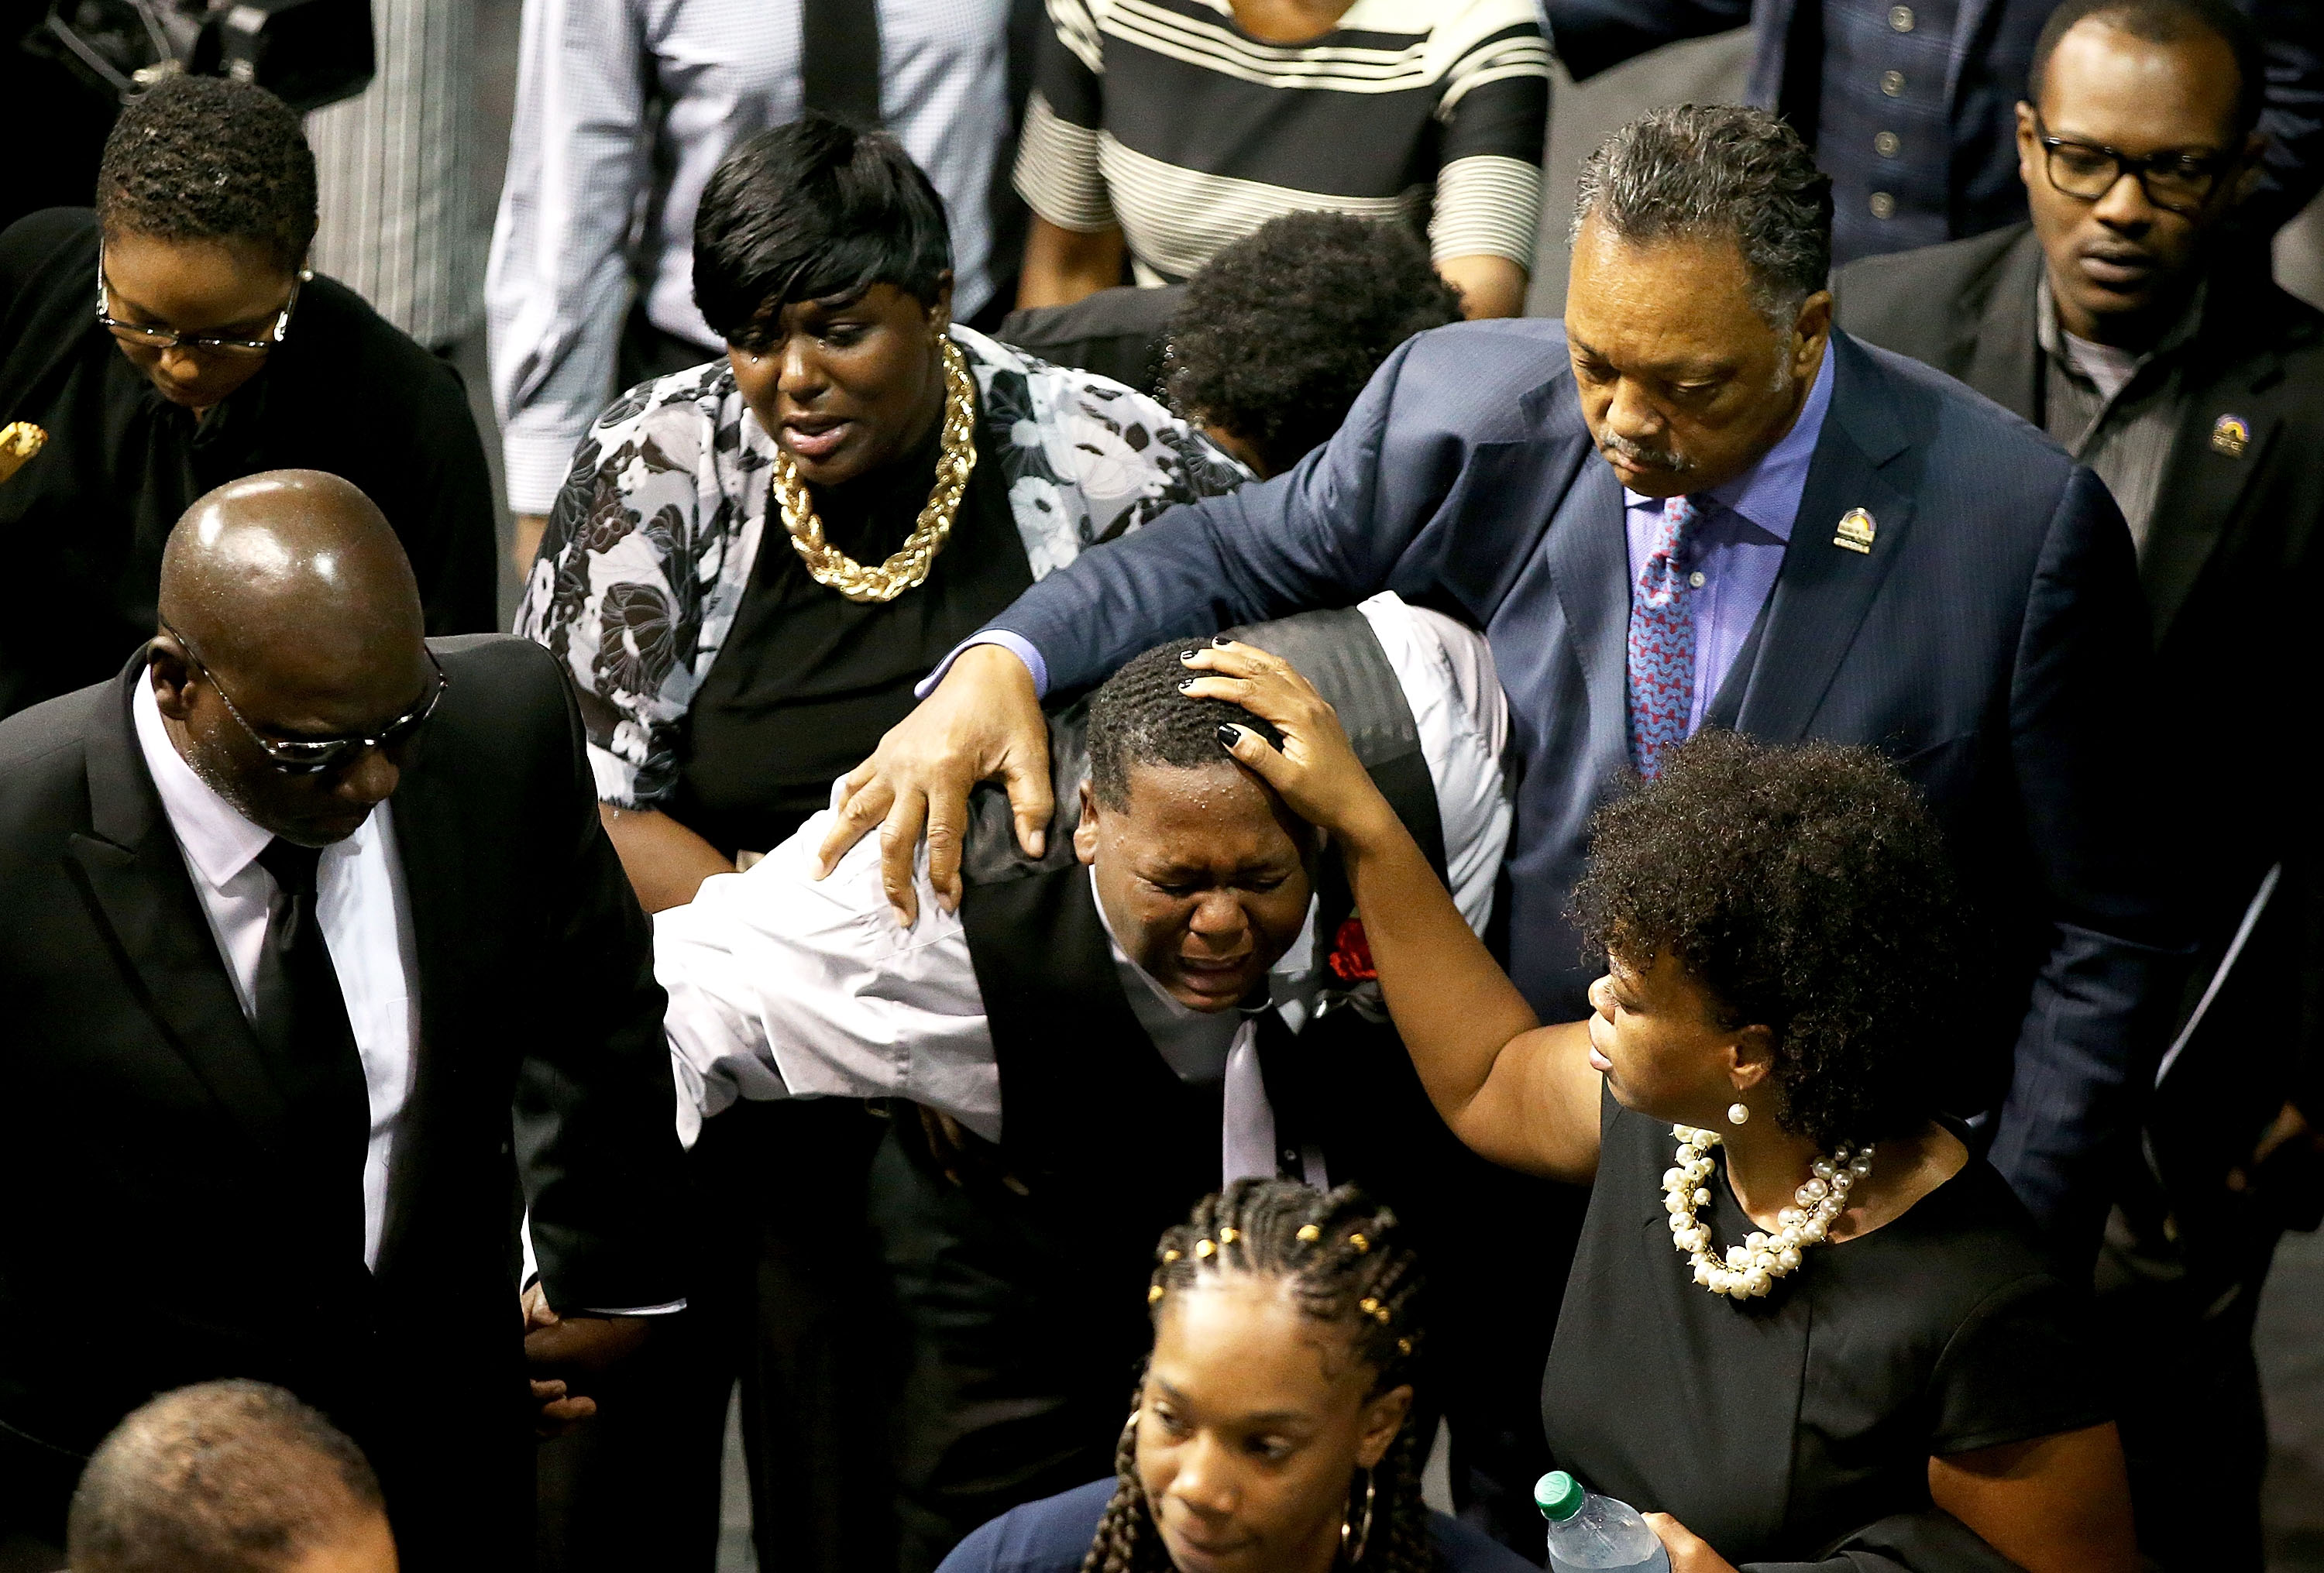 Alton Sterling Funeral Photos Of The Week July 15 21 2016